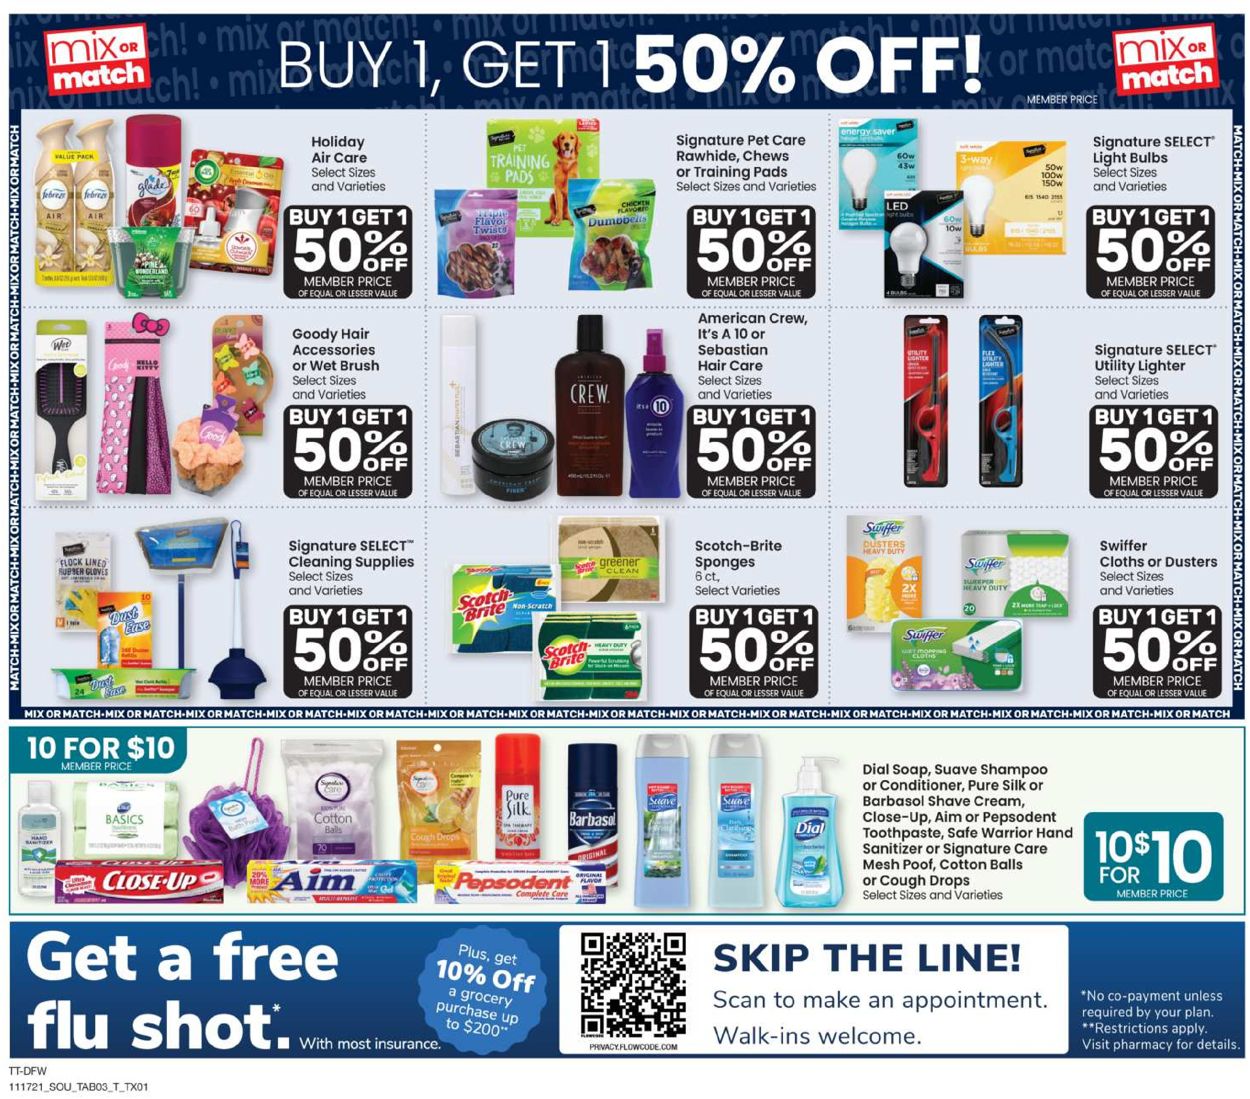 Tom Thumb Ad from 11/17/2021